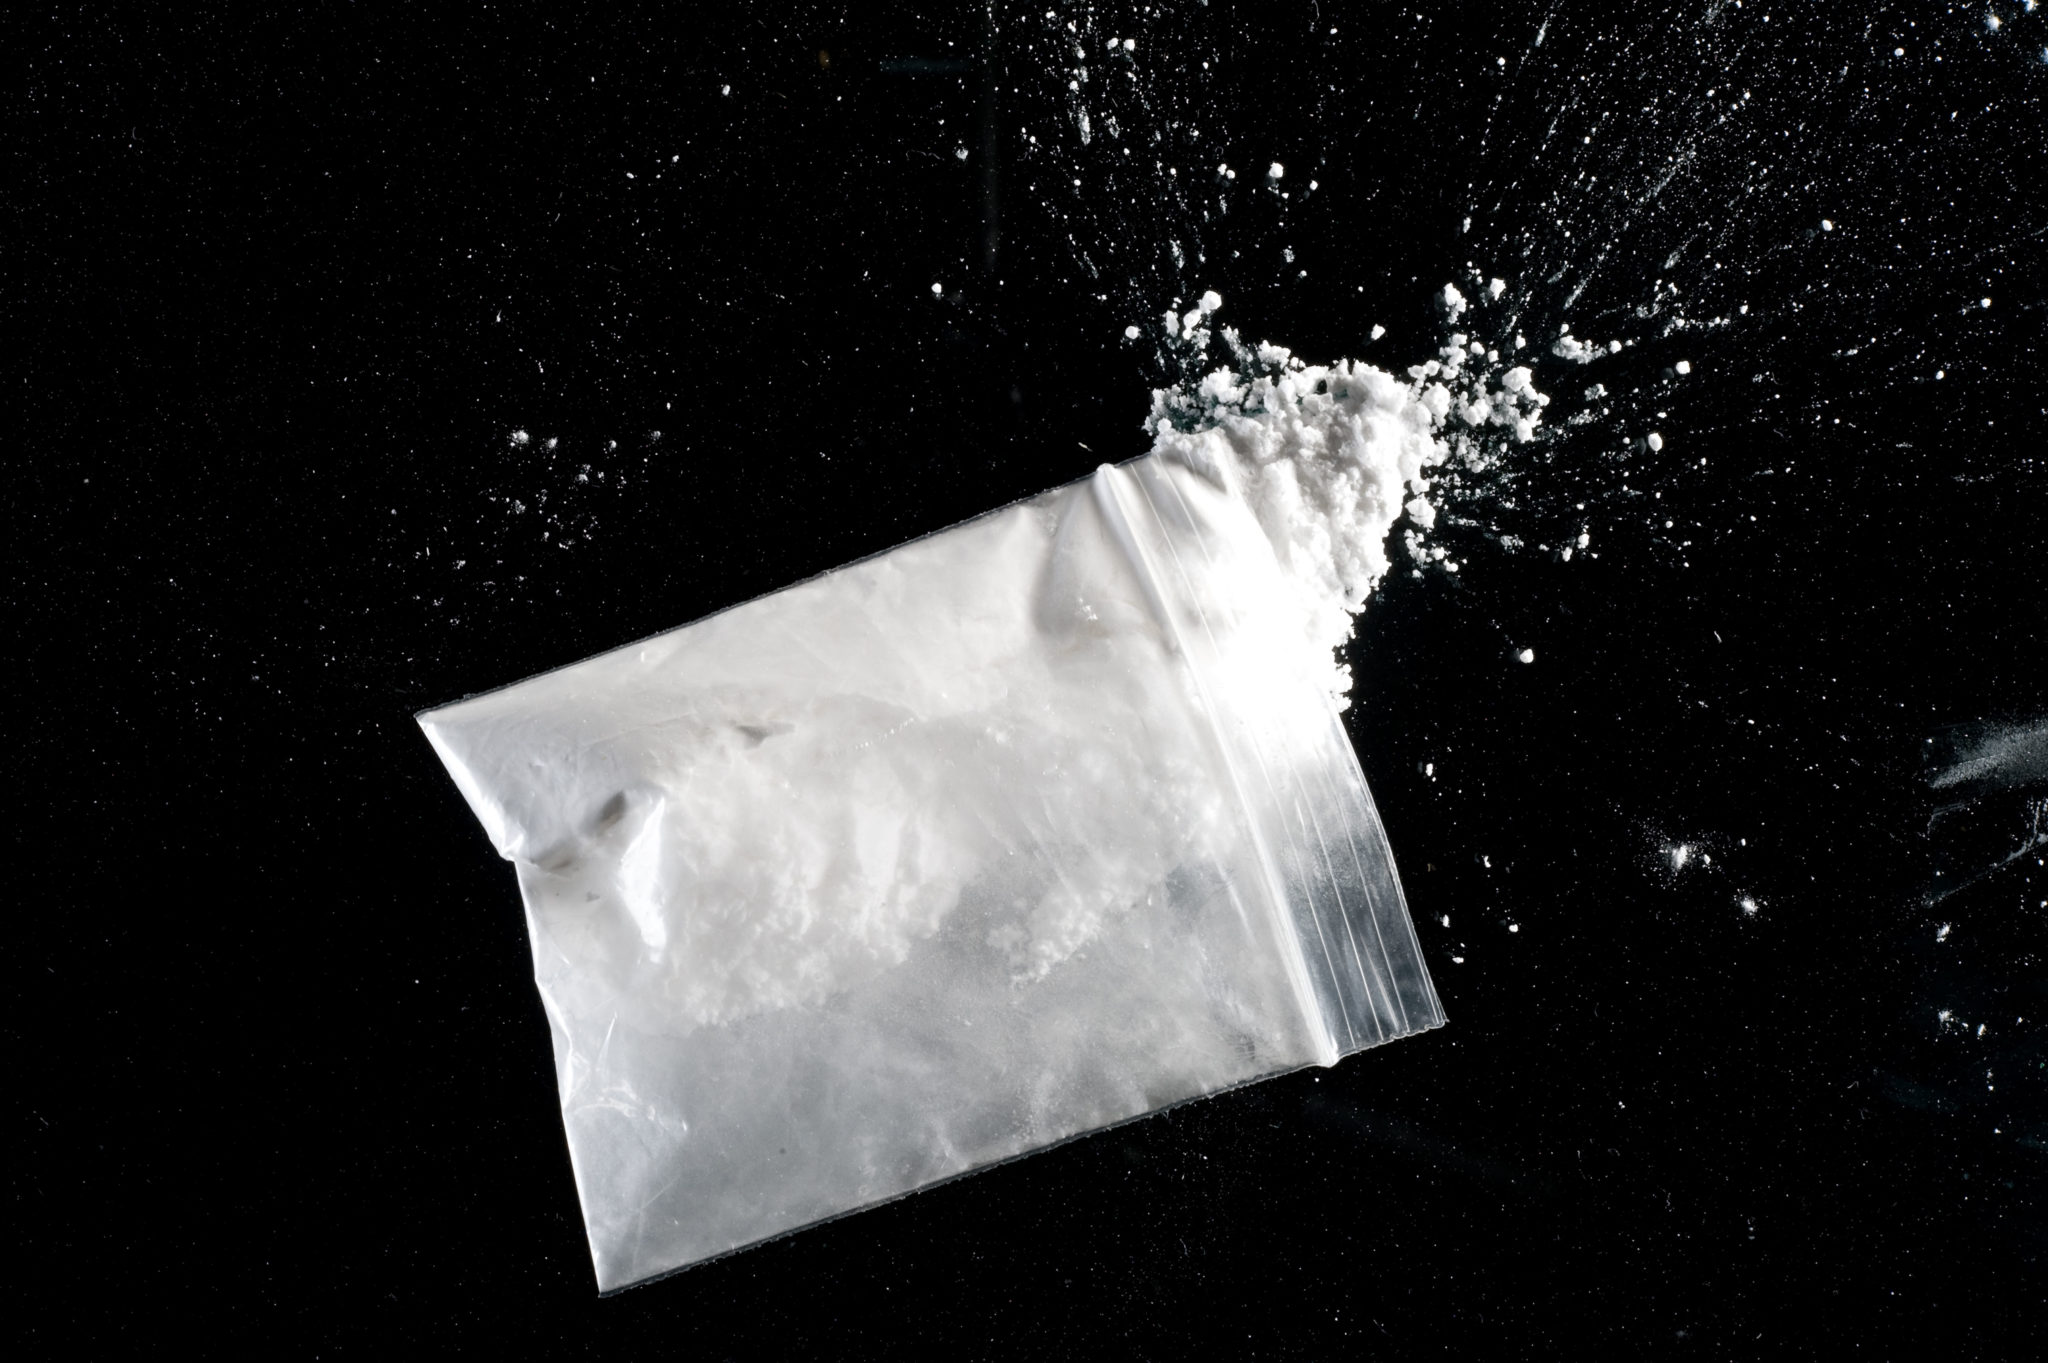 Bag of cocaine powder spilling out onto black surface. Image: Paul Bock / Alamy Stock Photo